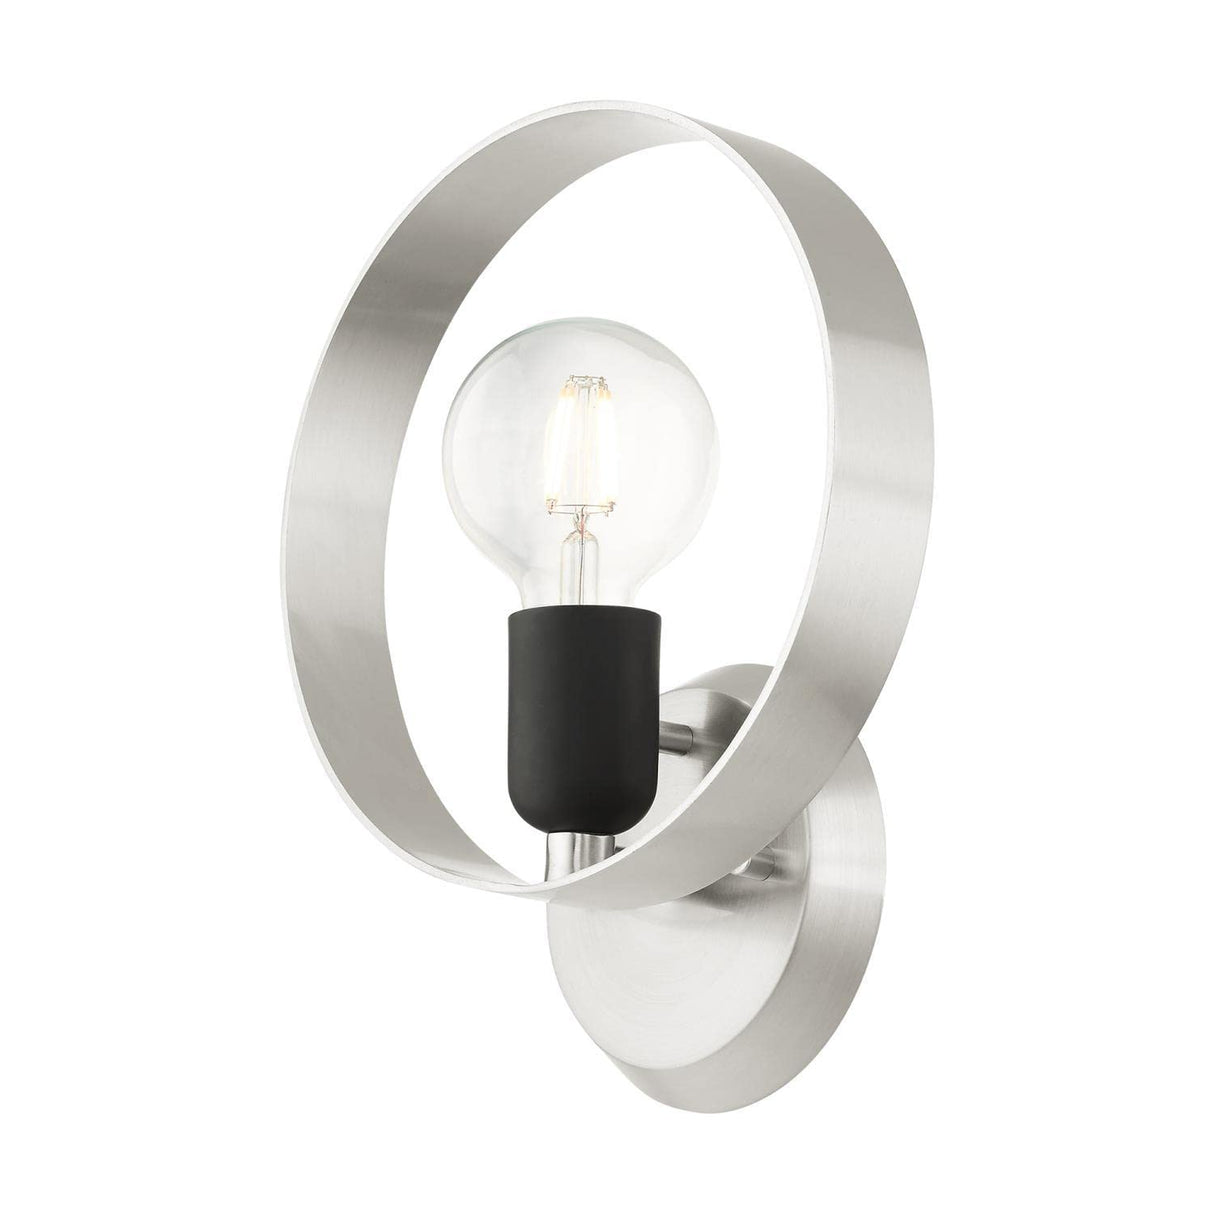 Livex Lighting 1 Light ADA Wall Sconce Brushed Nickel Finish with Black Finish Accents